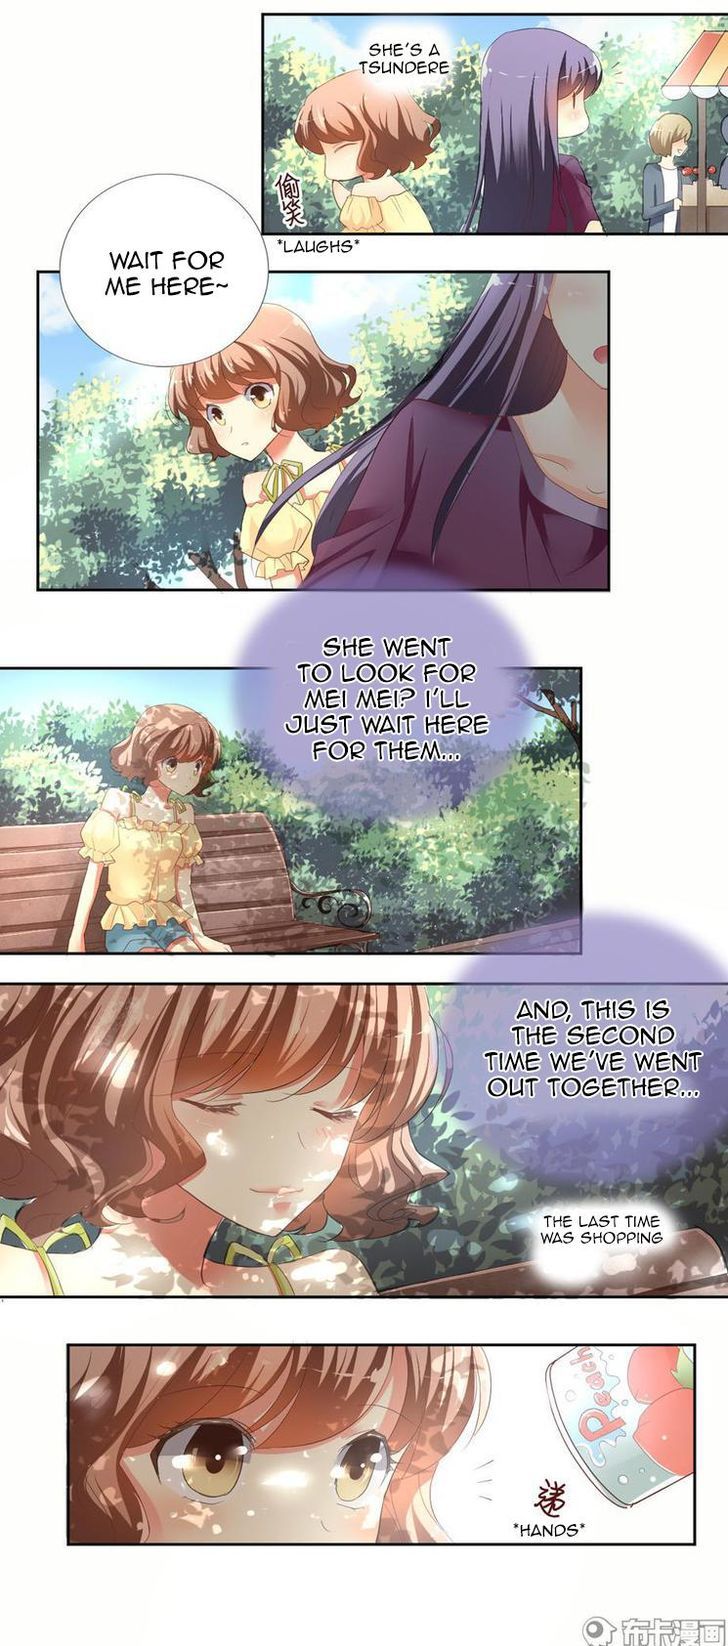 She Who is The Most Special to me - chapter 9 - #4